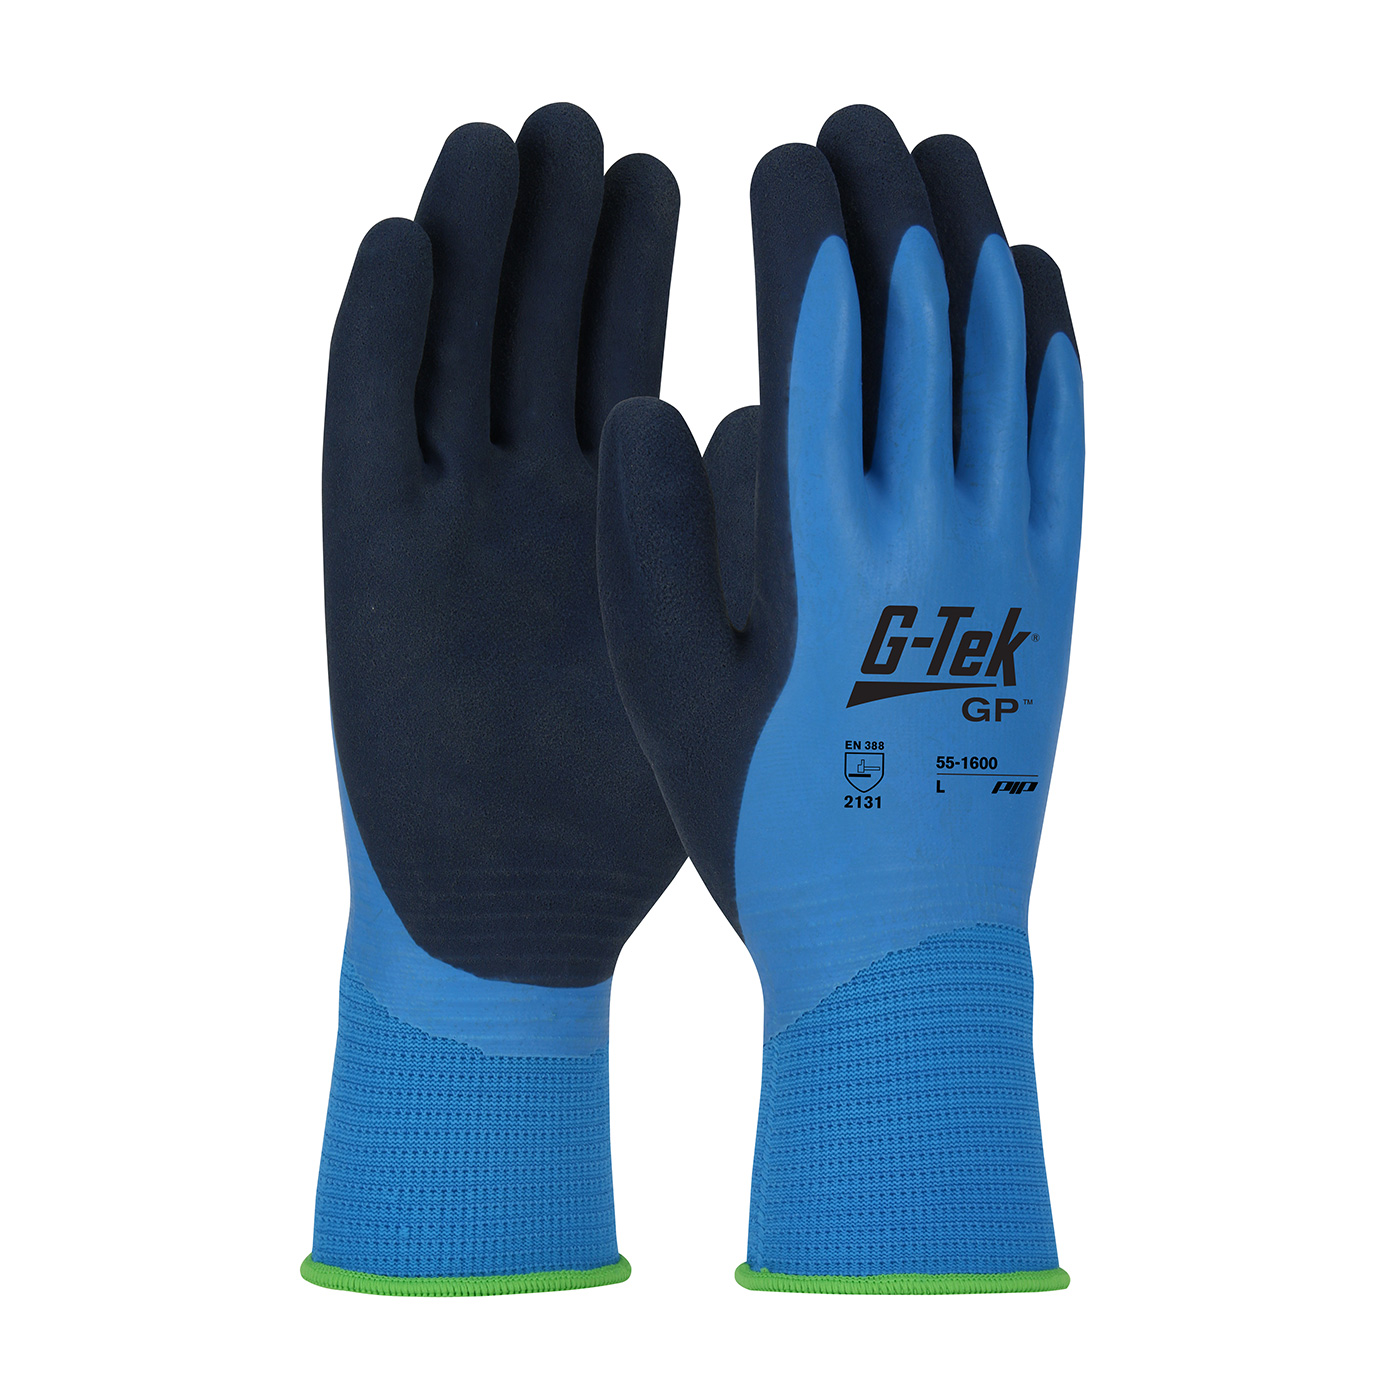 #55-1600 G-Tek® GP™  Waterproof Seamless Knit Nylon Glove with Double-Dipped Latex Coated MicroSurface Grip on Palm, Fingers & Knuckles 